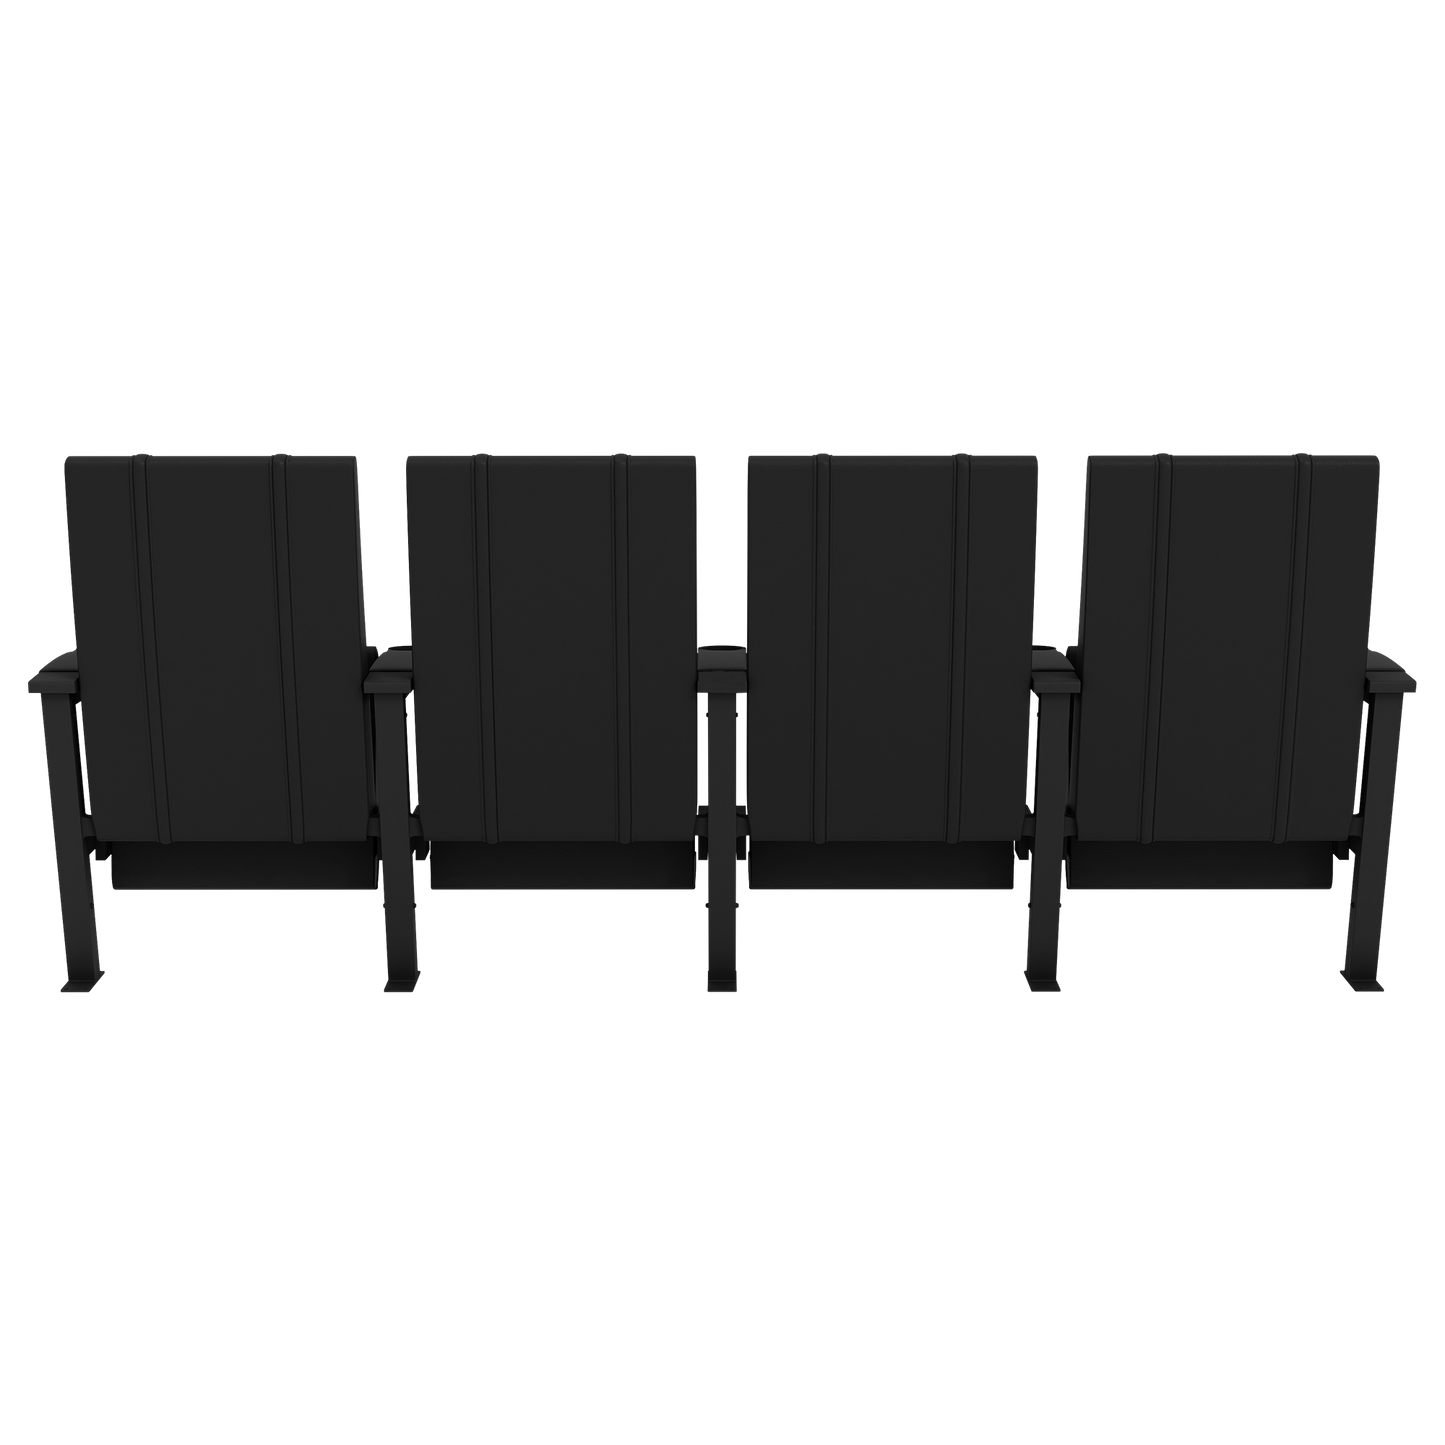 SuiteMax 3.5 VIP Seats with Chevy Trucks Logo